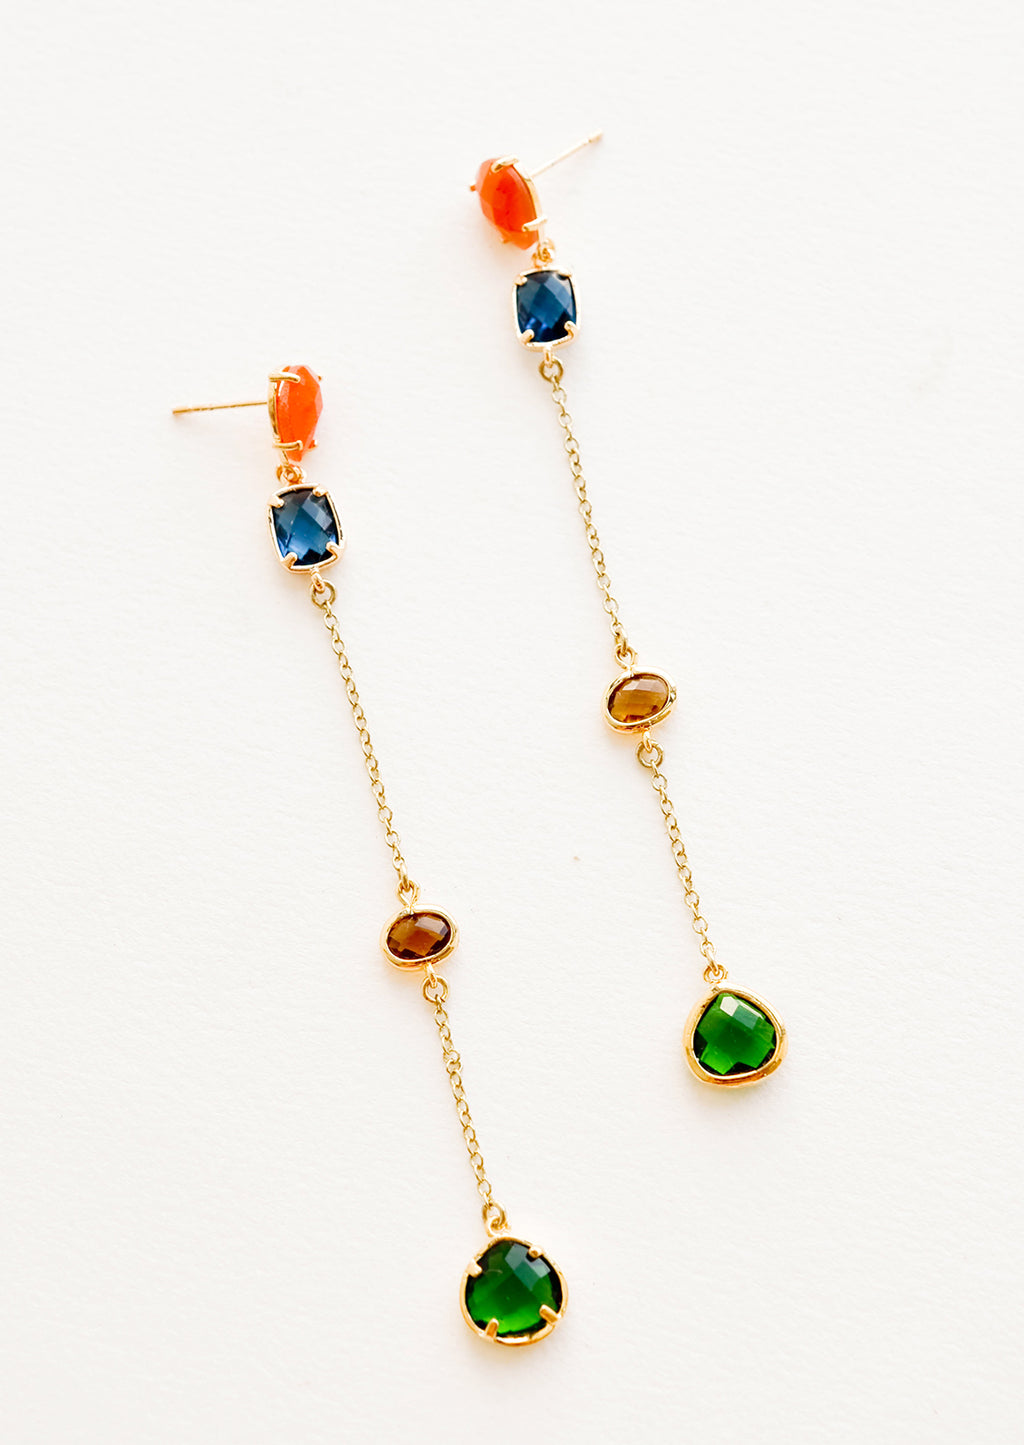 1: Gold drops earrings with staggered glass crystals of orange, blue, amber, and green.